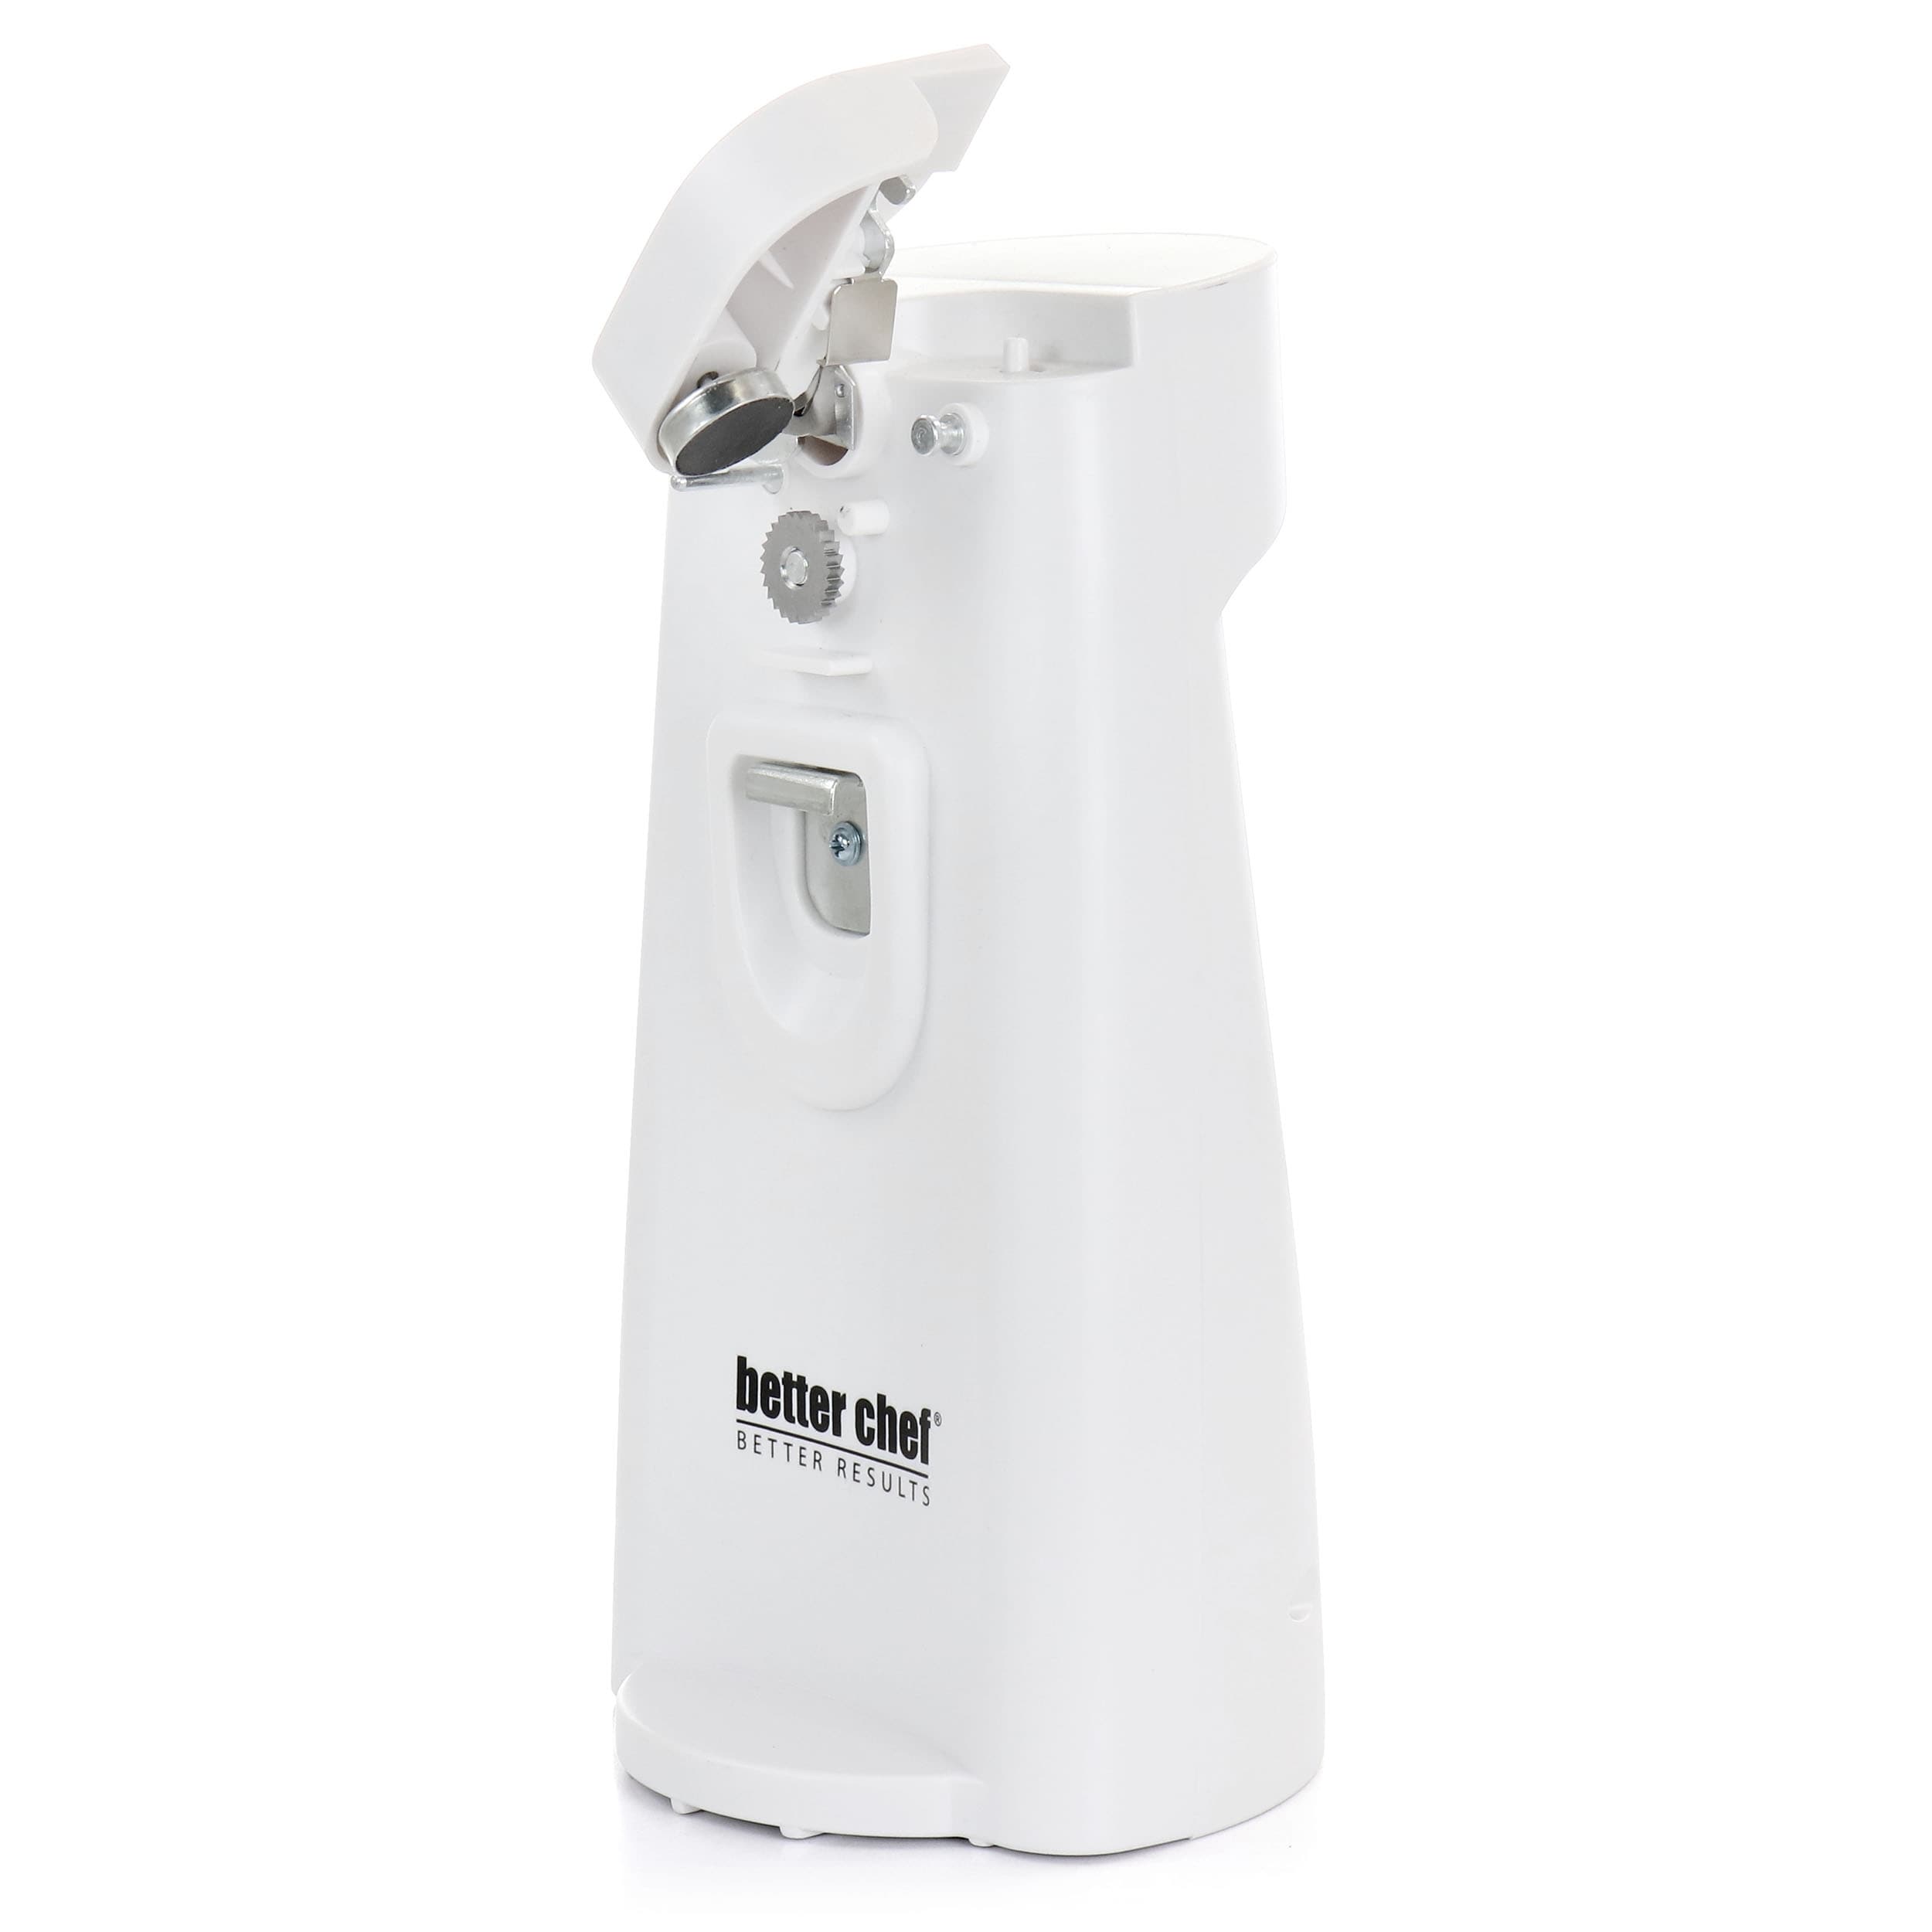 Proctor Silex Electric Can Openers